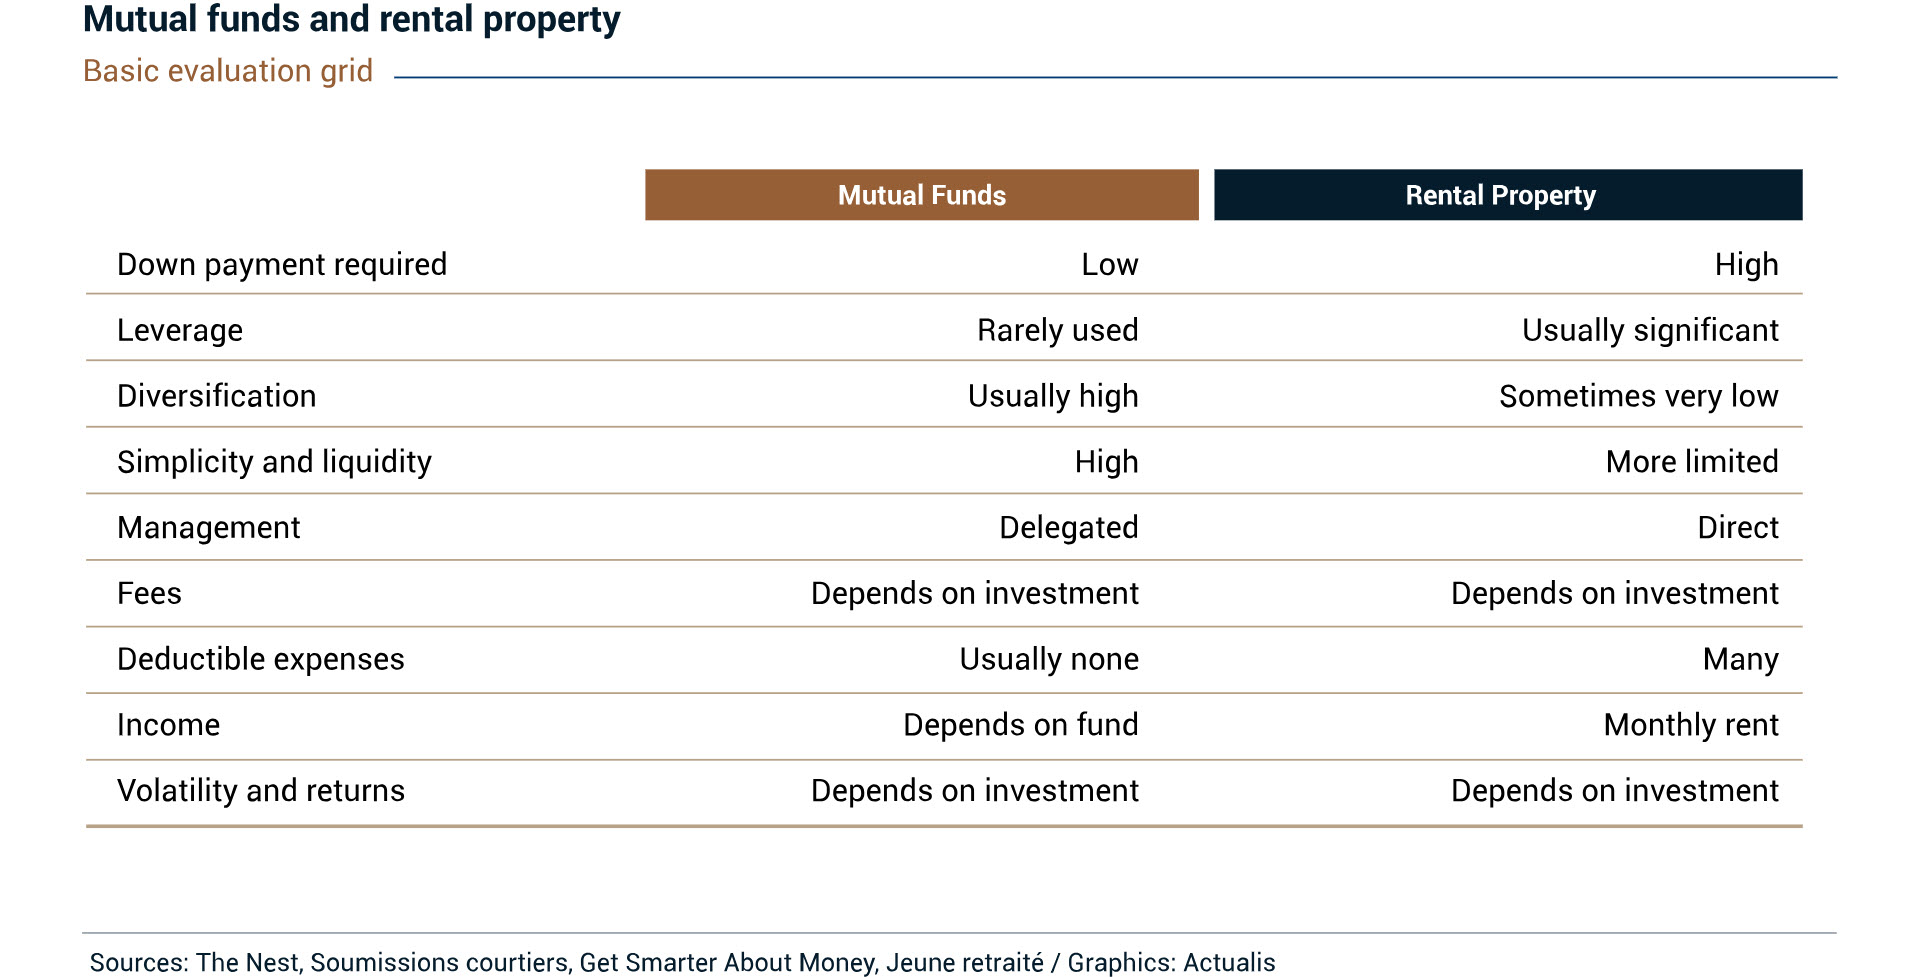 Table comparing a mutual fund investment with a rental property investment. The table shows the differences in terms of the down payment required, leverage, diversification, simplicity, liquidity, management and deductible expenses. However, in terms of fees, income, volatility and returns, it shows that the differences depend on the specific investment made.